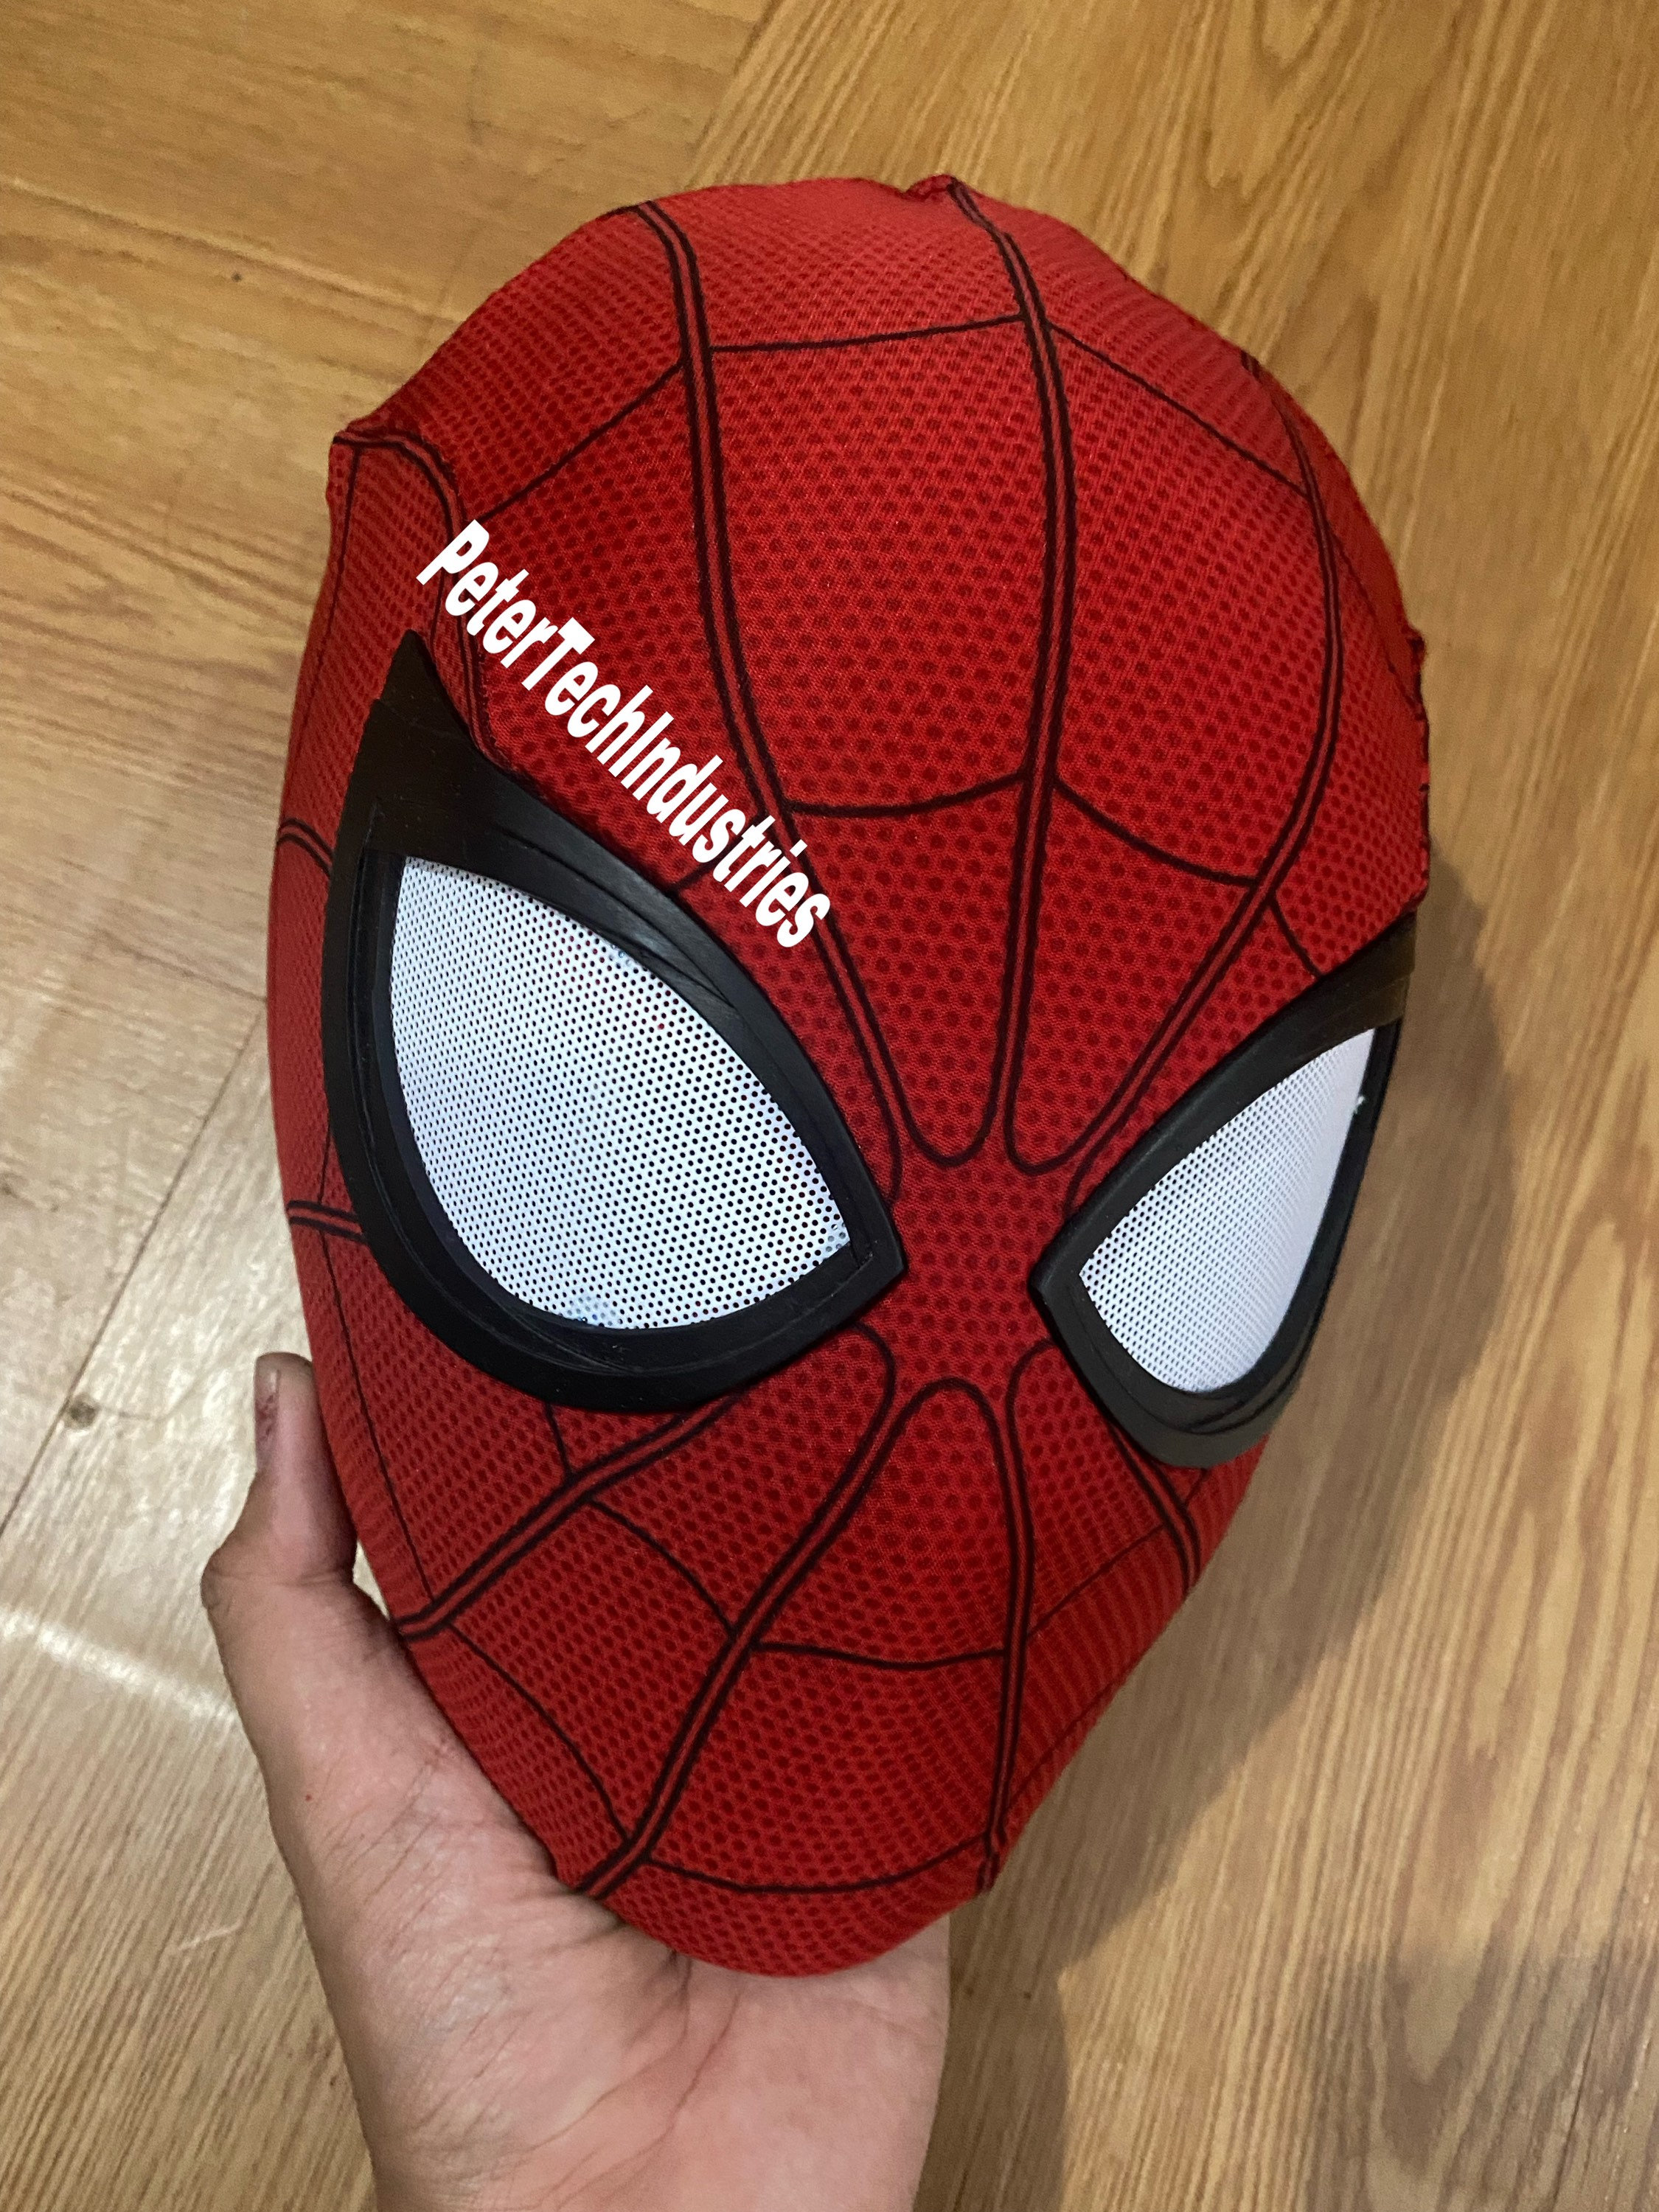 Mcu Spiderman From Home Faceshell Mask Spiderman Etsy